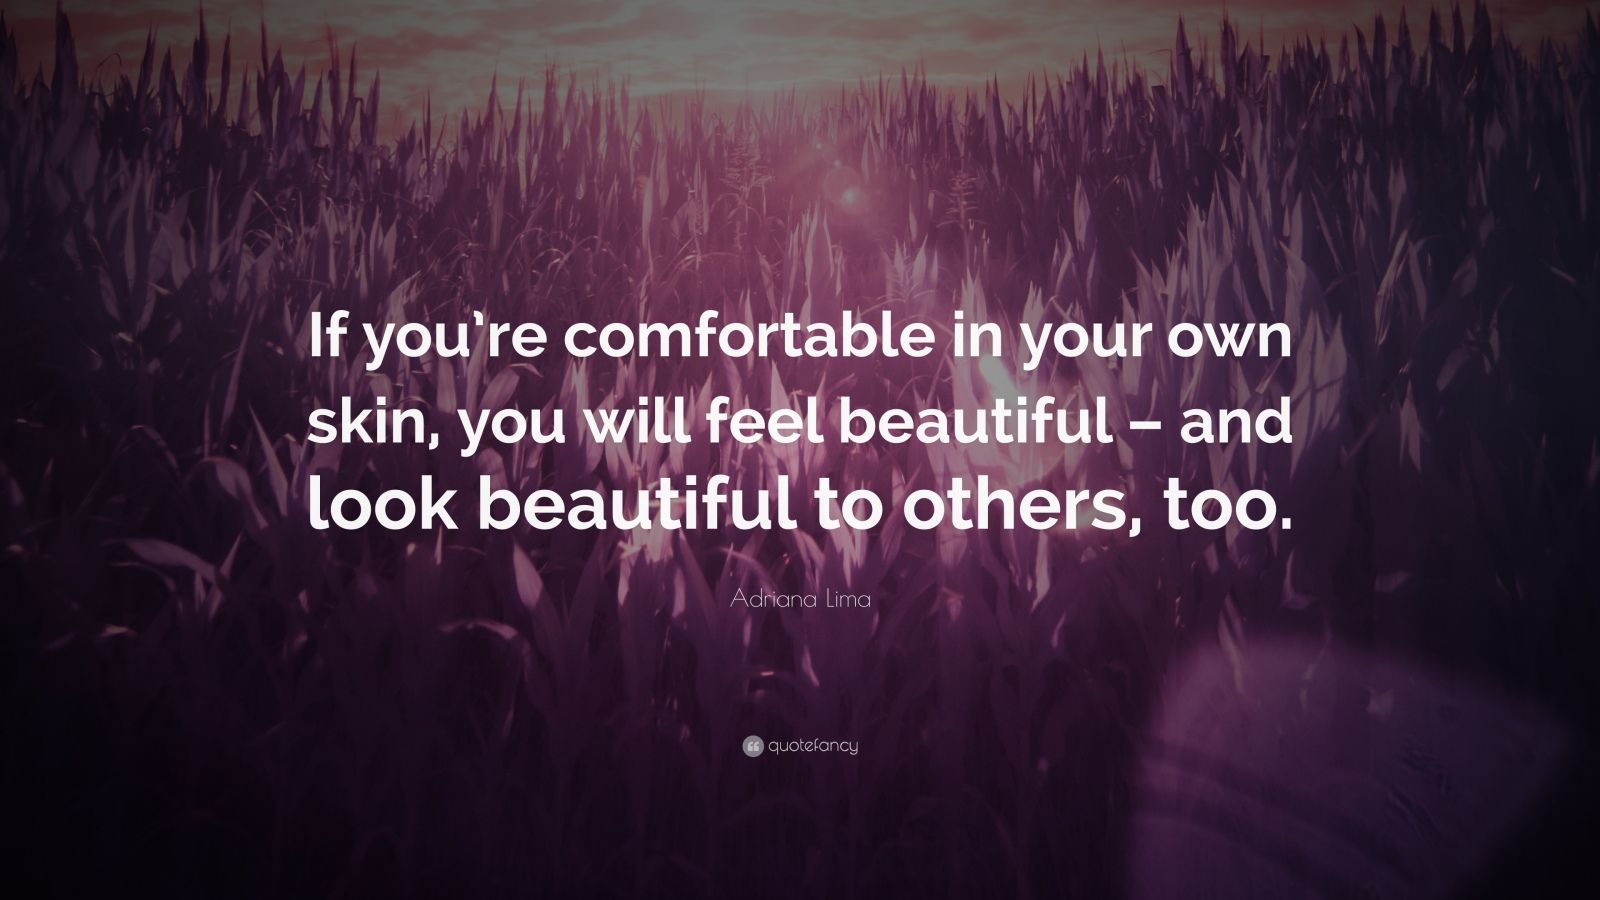 Adriana Lima Quote “if Youre Comfortable In Your Own Skin You Will